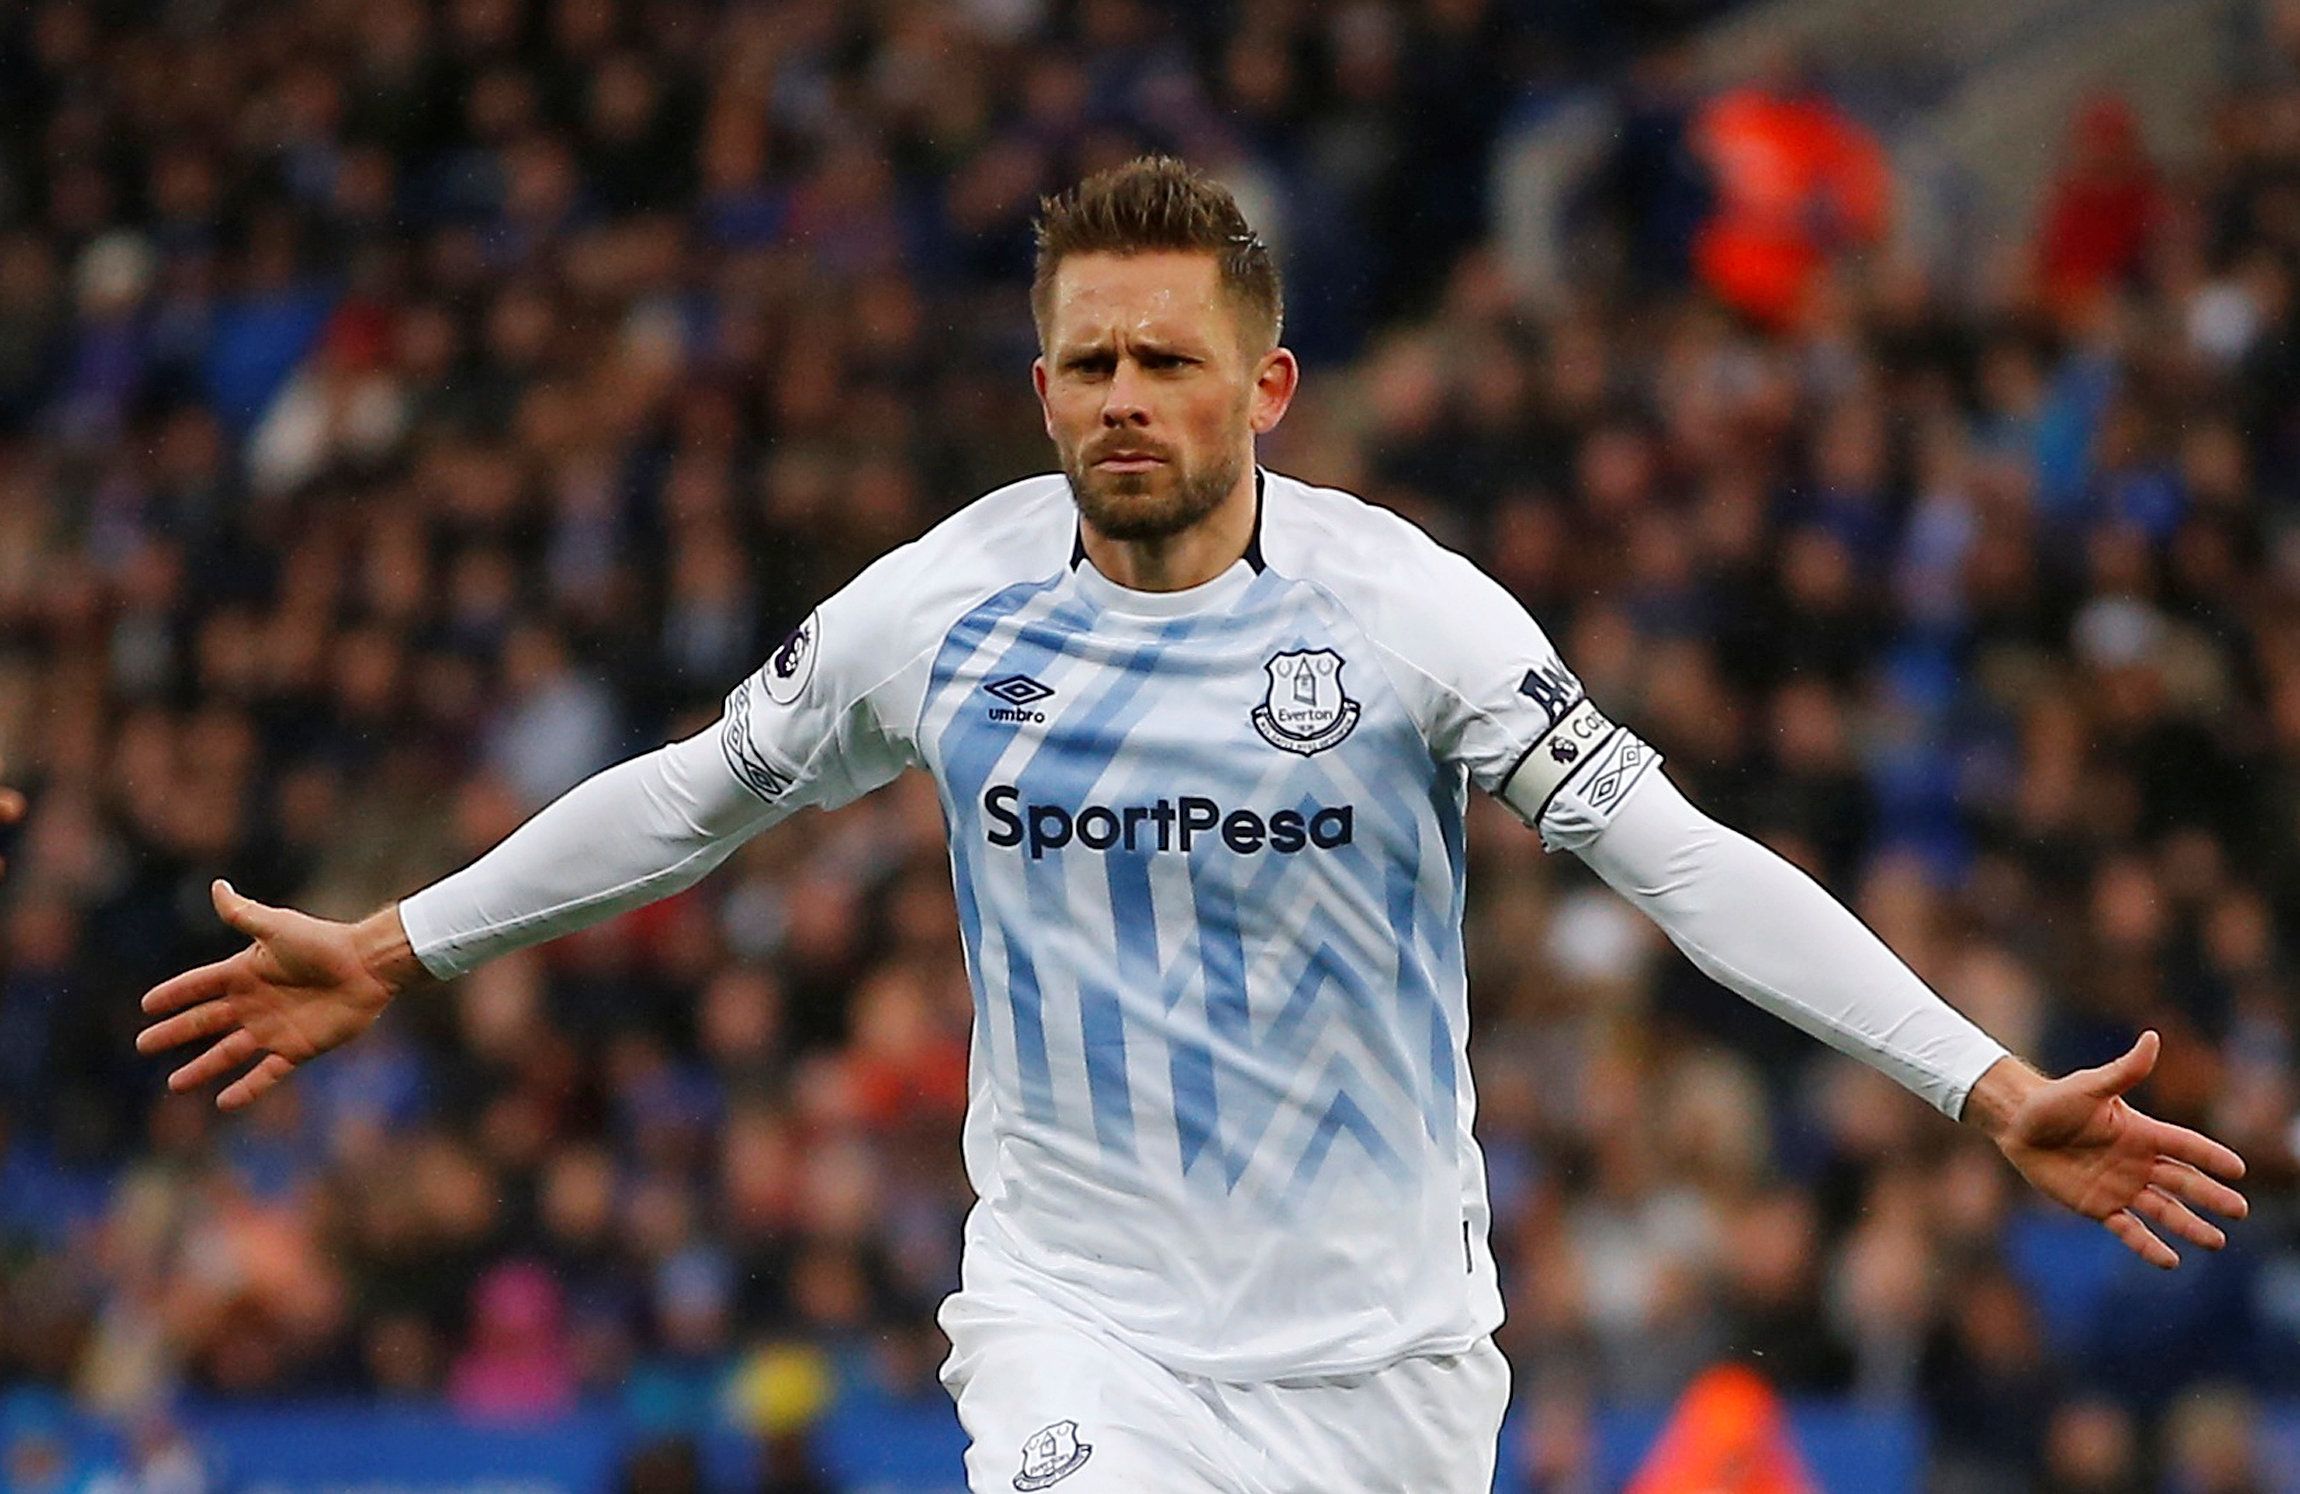 Soccer Football - Premier League - Leicester City v Everton - King Power Stadium, Leicester, Britain - October 6, 2018  Everton's Gylfi Sigurdsson celebrates scoring their second goal  Action Images via Reuters/Craig Brough  EDITORIAL USE ONLY. No use with unauthorized audio, video, data, fixture lists, club/league logos or "live" services. Online in-match use limited to 75 images, no video emulation. No use in betting, games or single club/league/player publications.  Please contact your accoun